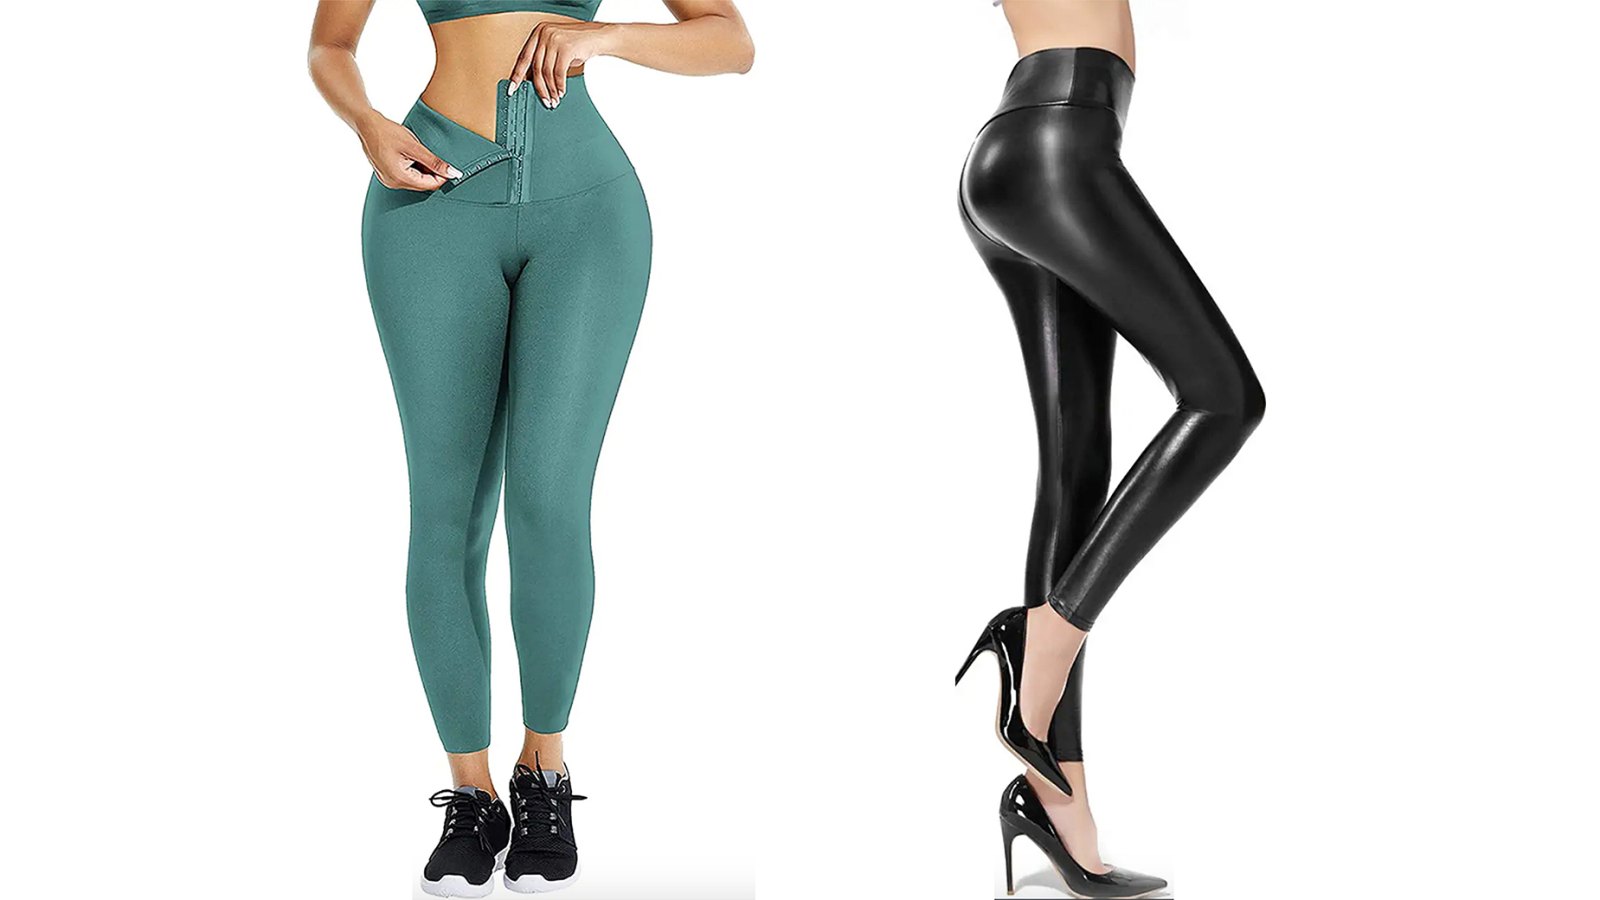 CLOSED HEELS COMPRESSION LEGGINGS WITH TUMMY CONTROL